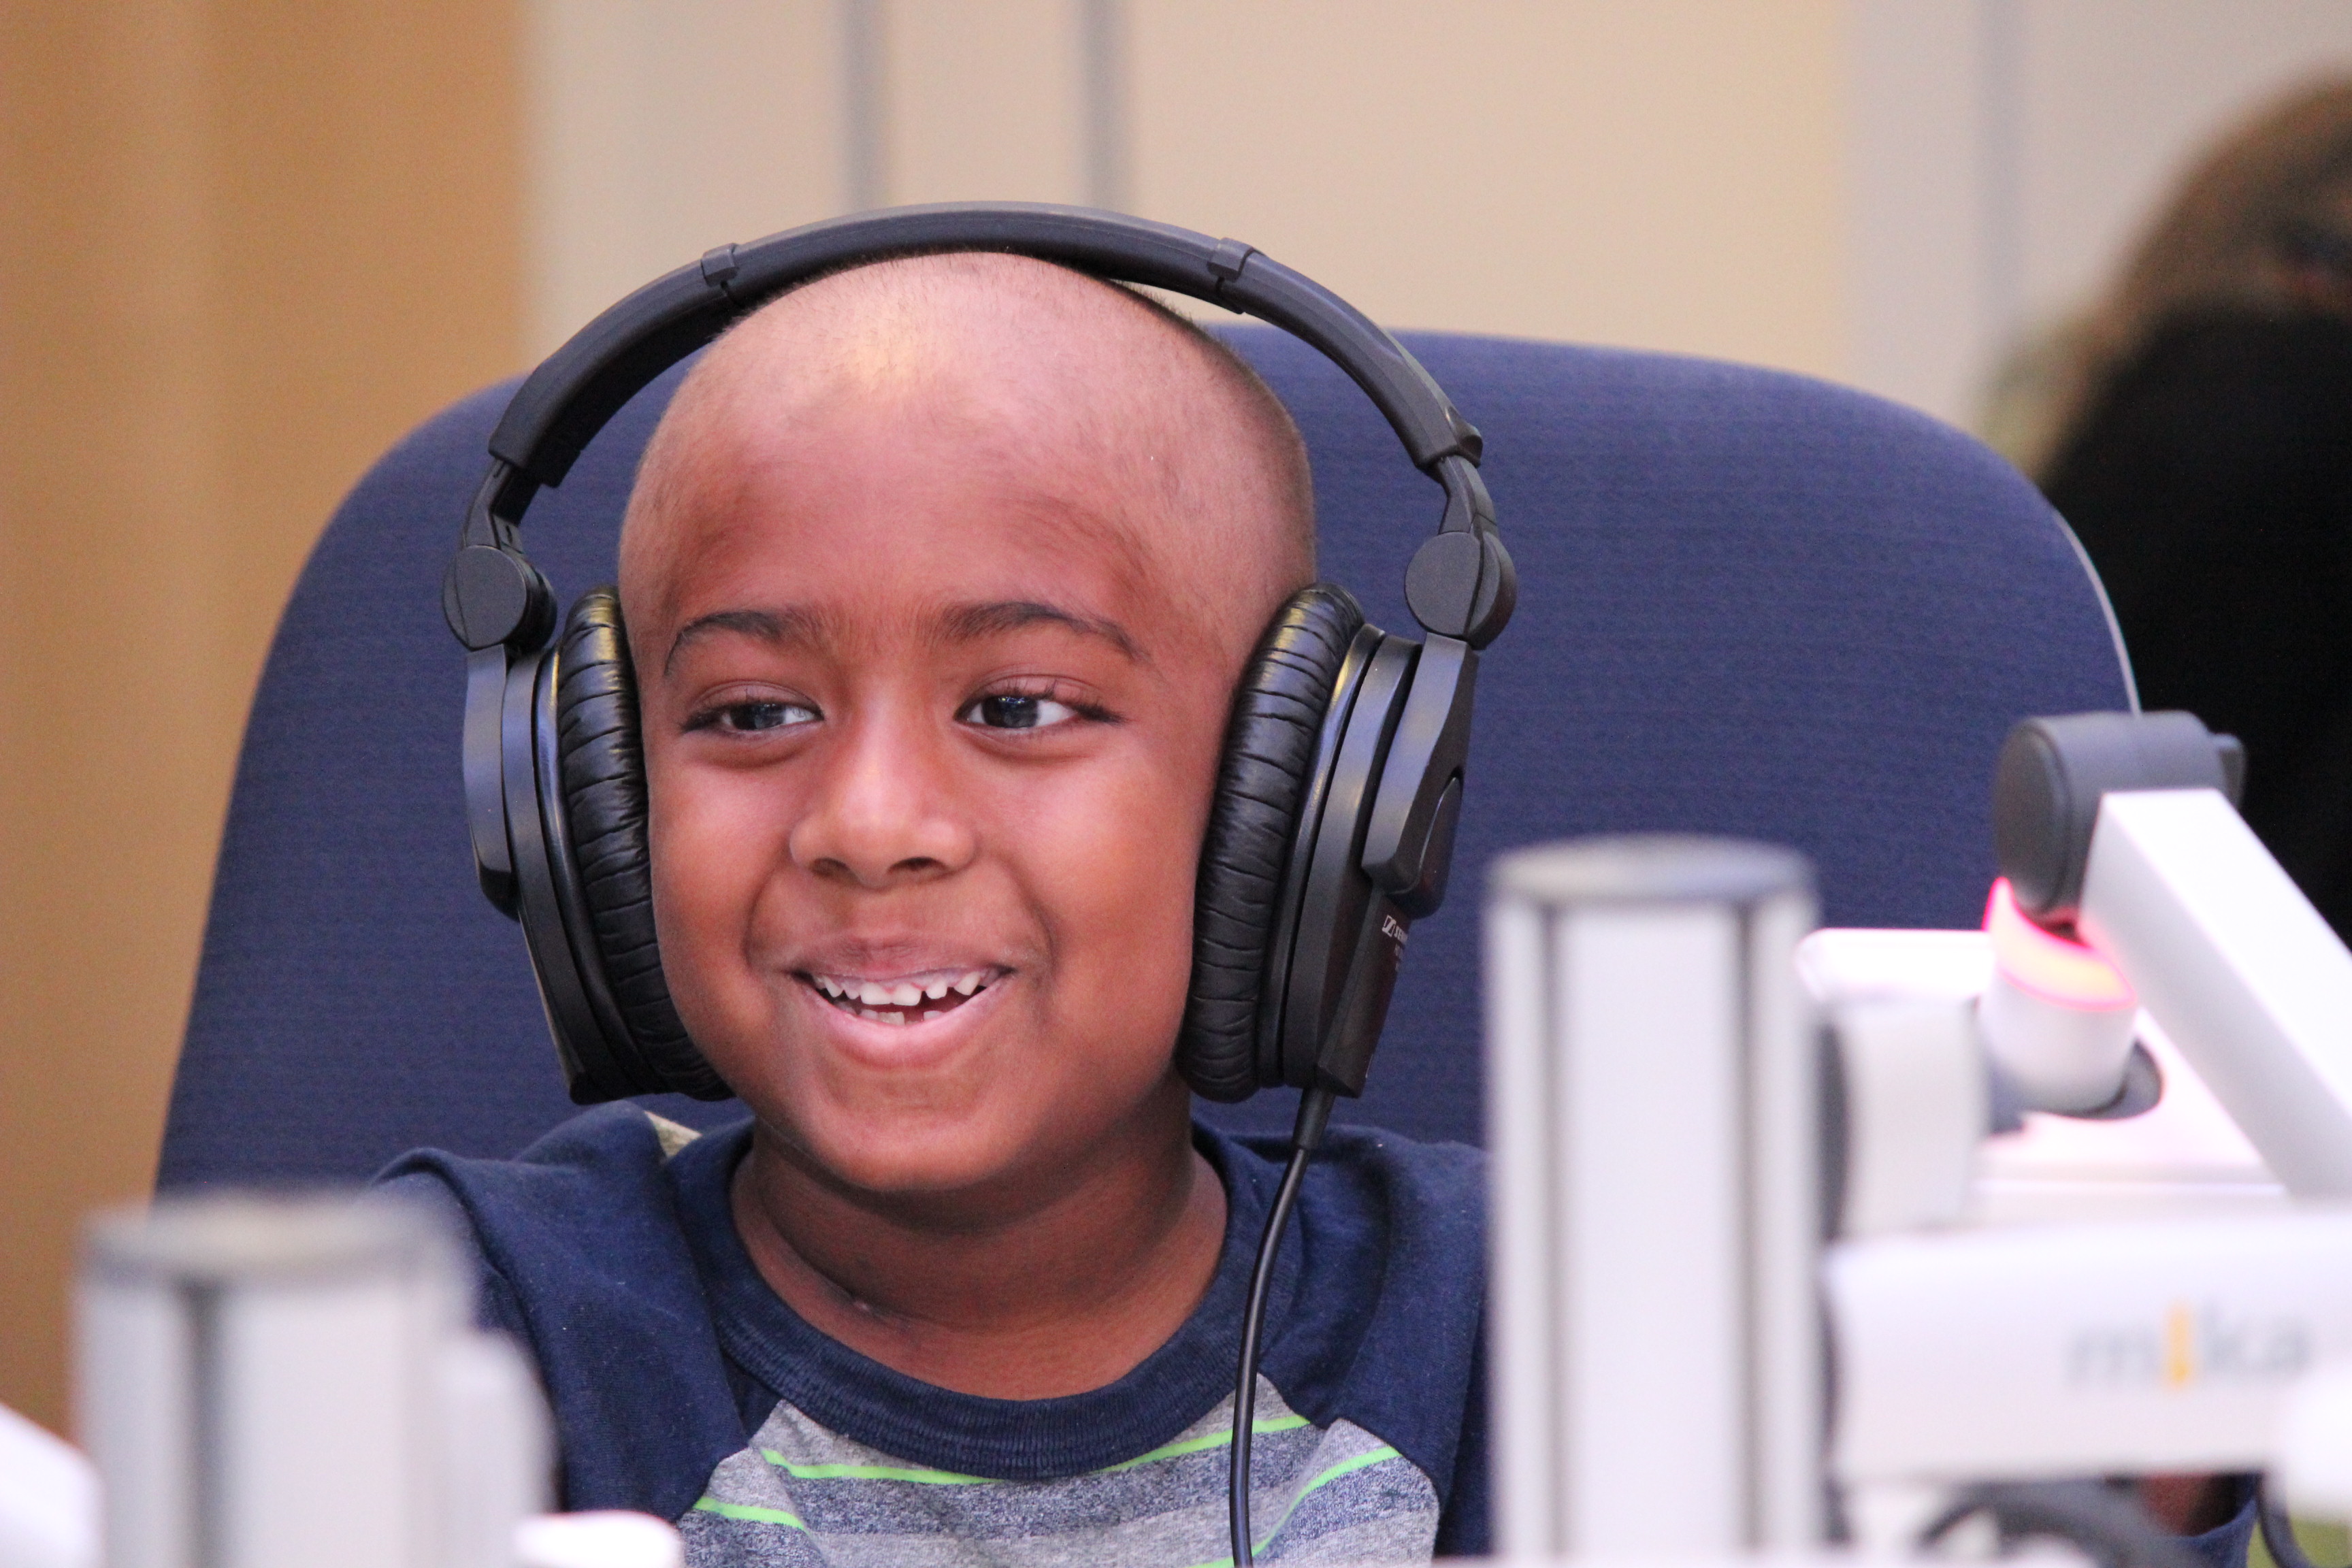 At Seacrest Studios at Boston Children’s Hospital, all programming is created by or for patients.